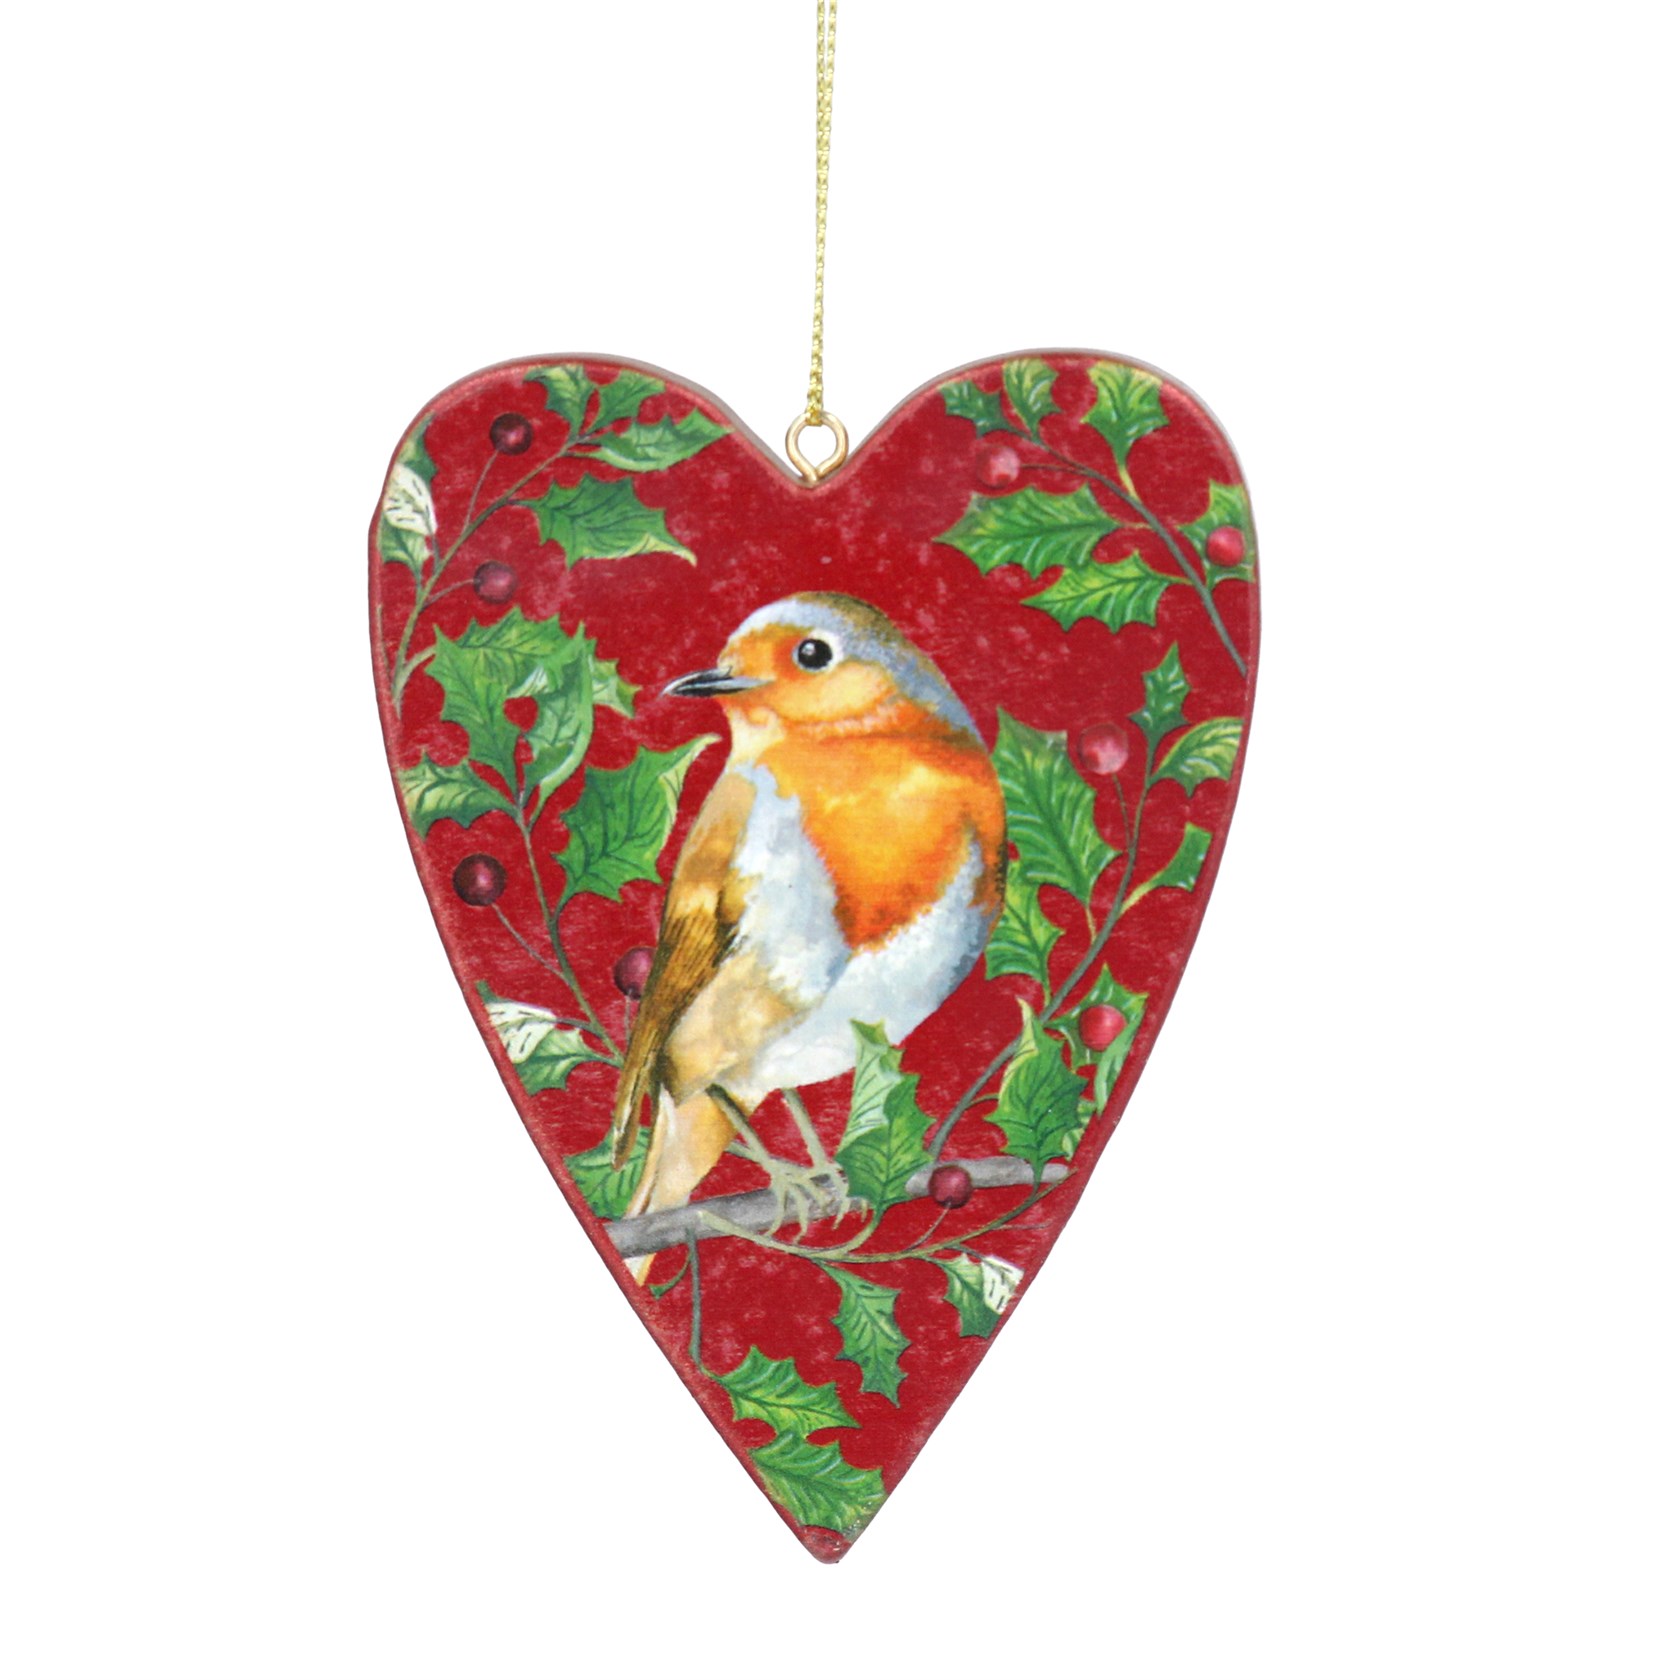 Red wooden heart Christmas hanging decoration with Robin and berries design. By London designer Gisela Graham. The perfect festive addition to your home.